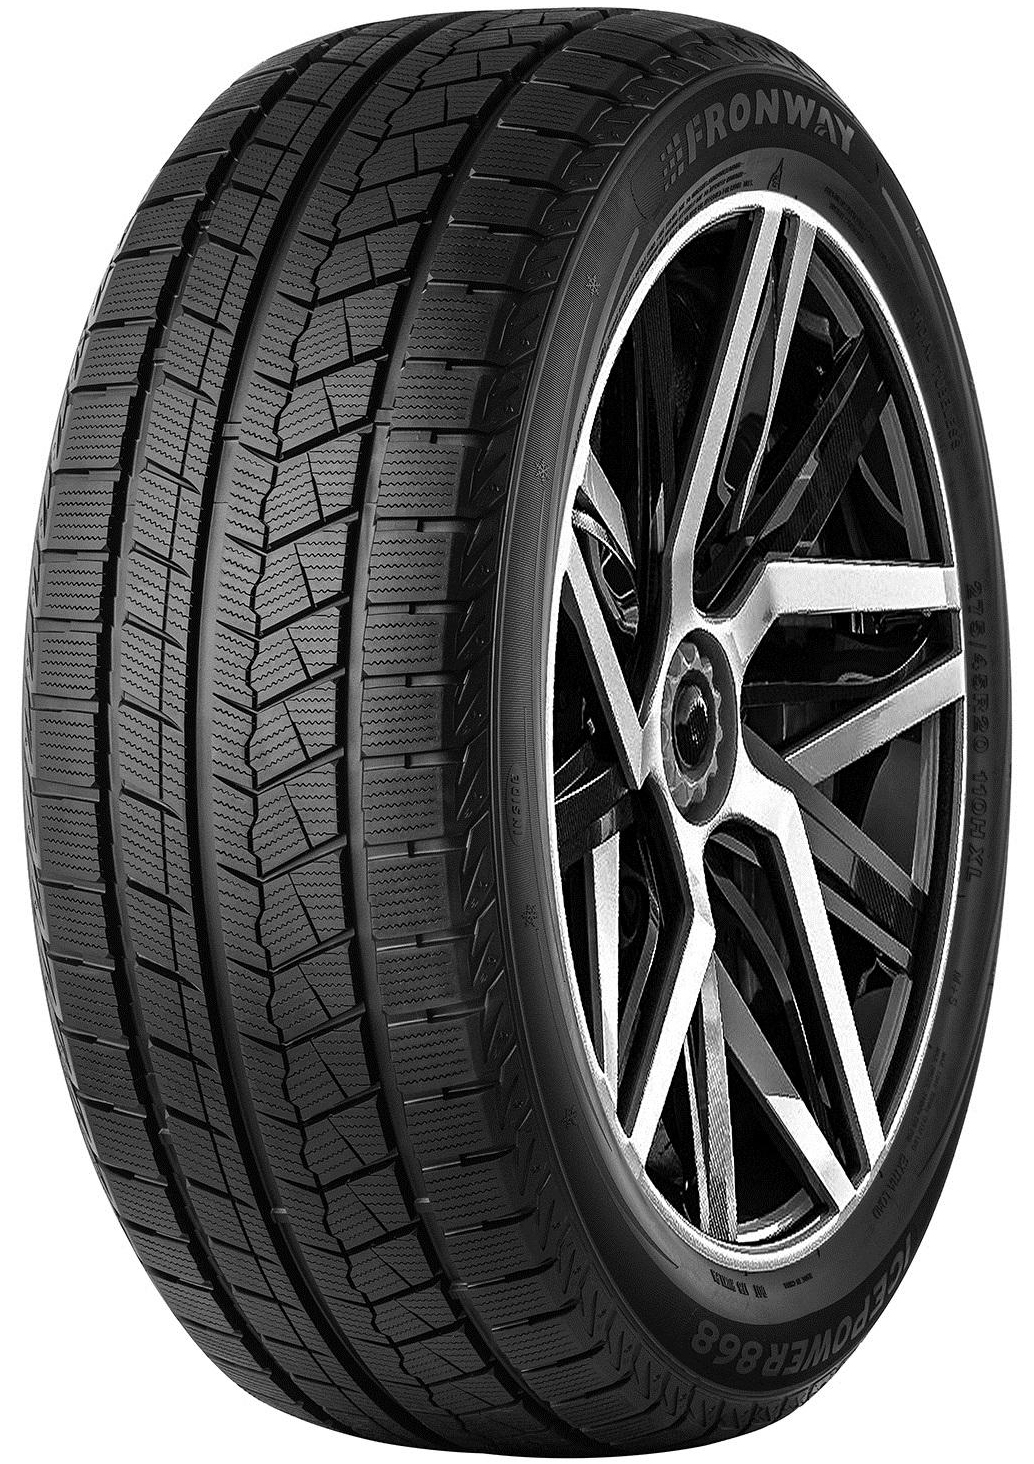    Fronway Icepower 868 235/60 R16 